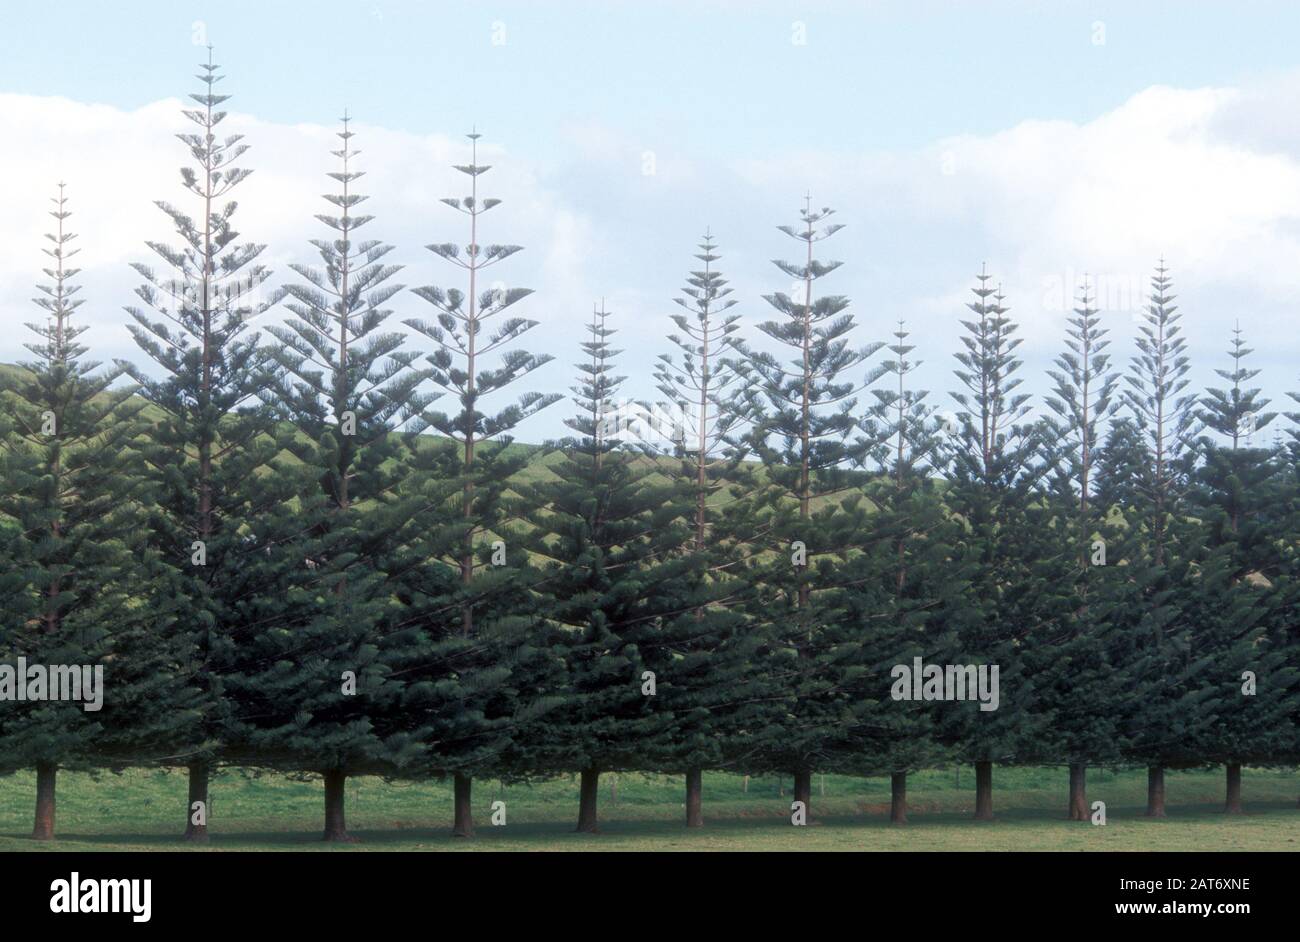 Norfolk Island Australia High Resolution Stock Photography And Images Alamy